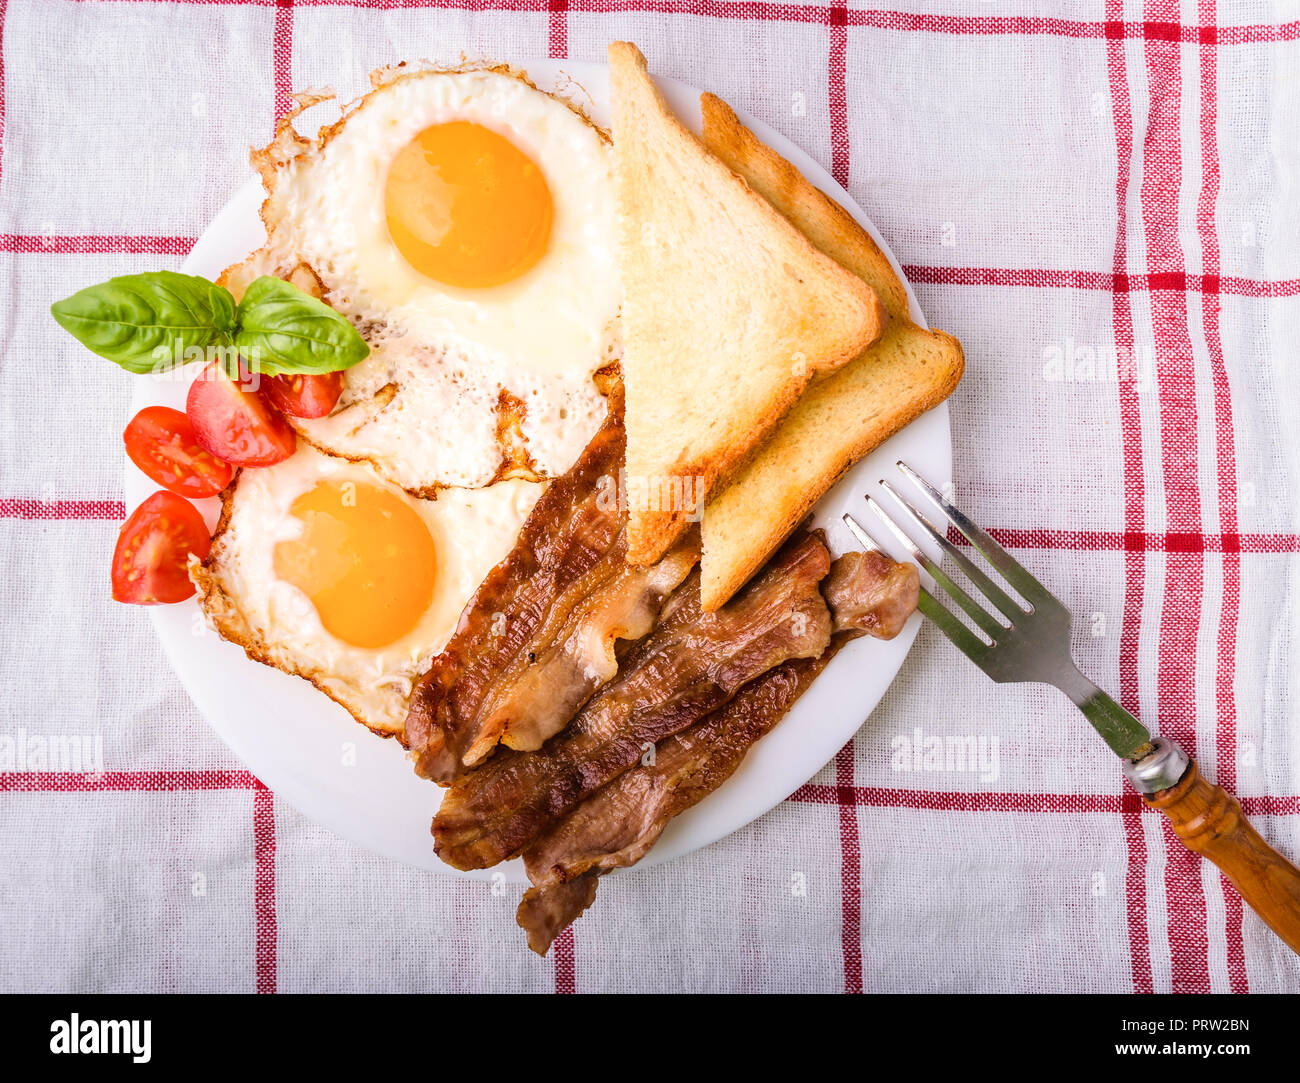 Breakfast with bacon and fried eggs. Served on white plate with sliced cherry tomato, basil leaves and crispy toast slice. Top view, view from above. Stock Photo